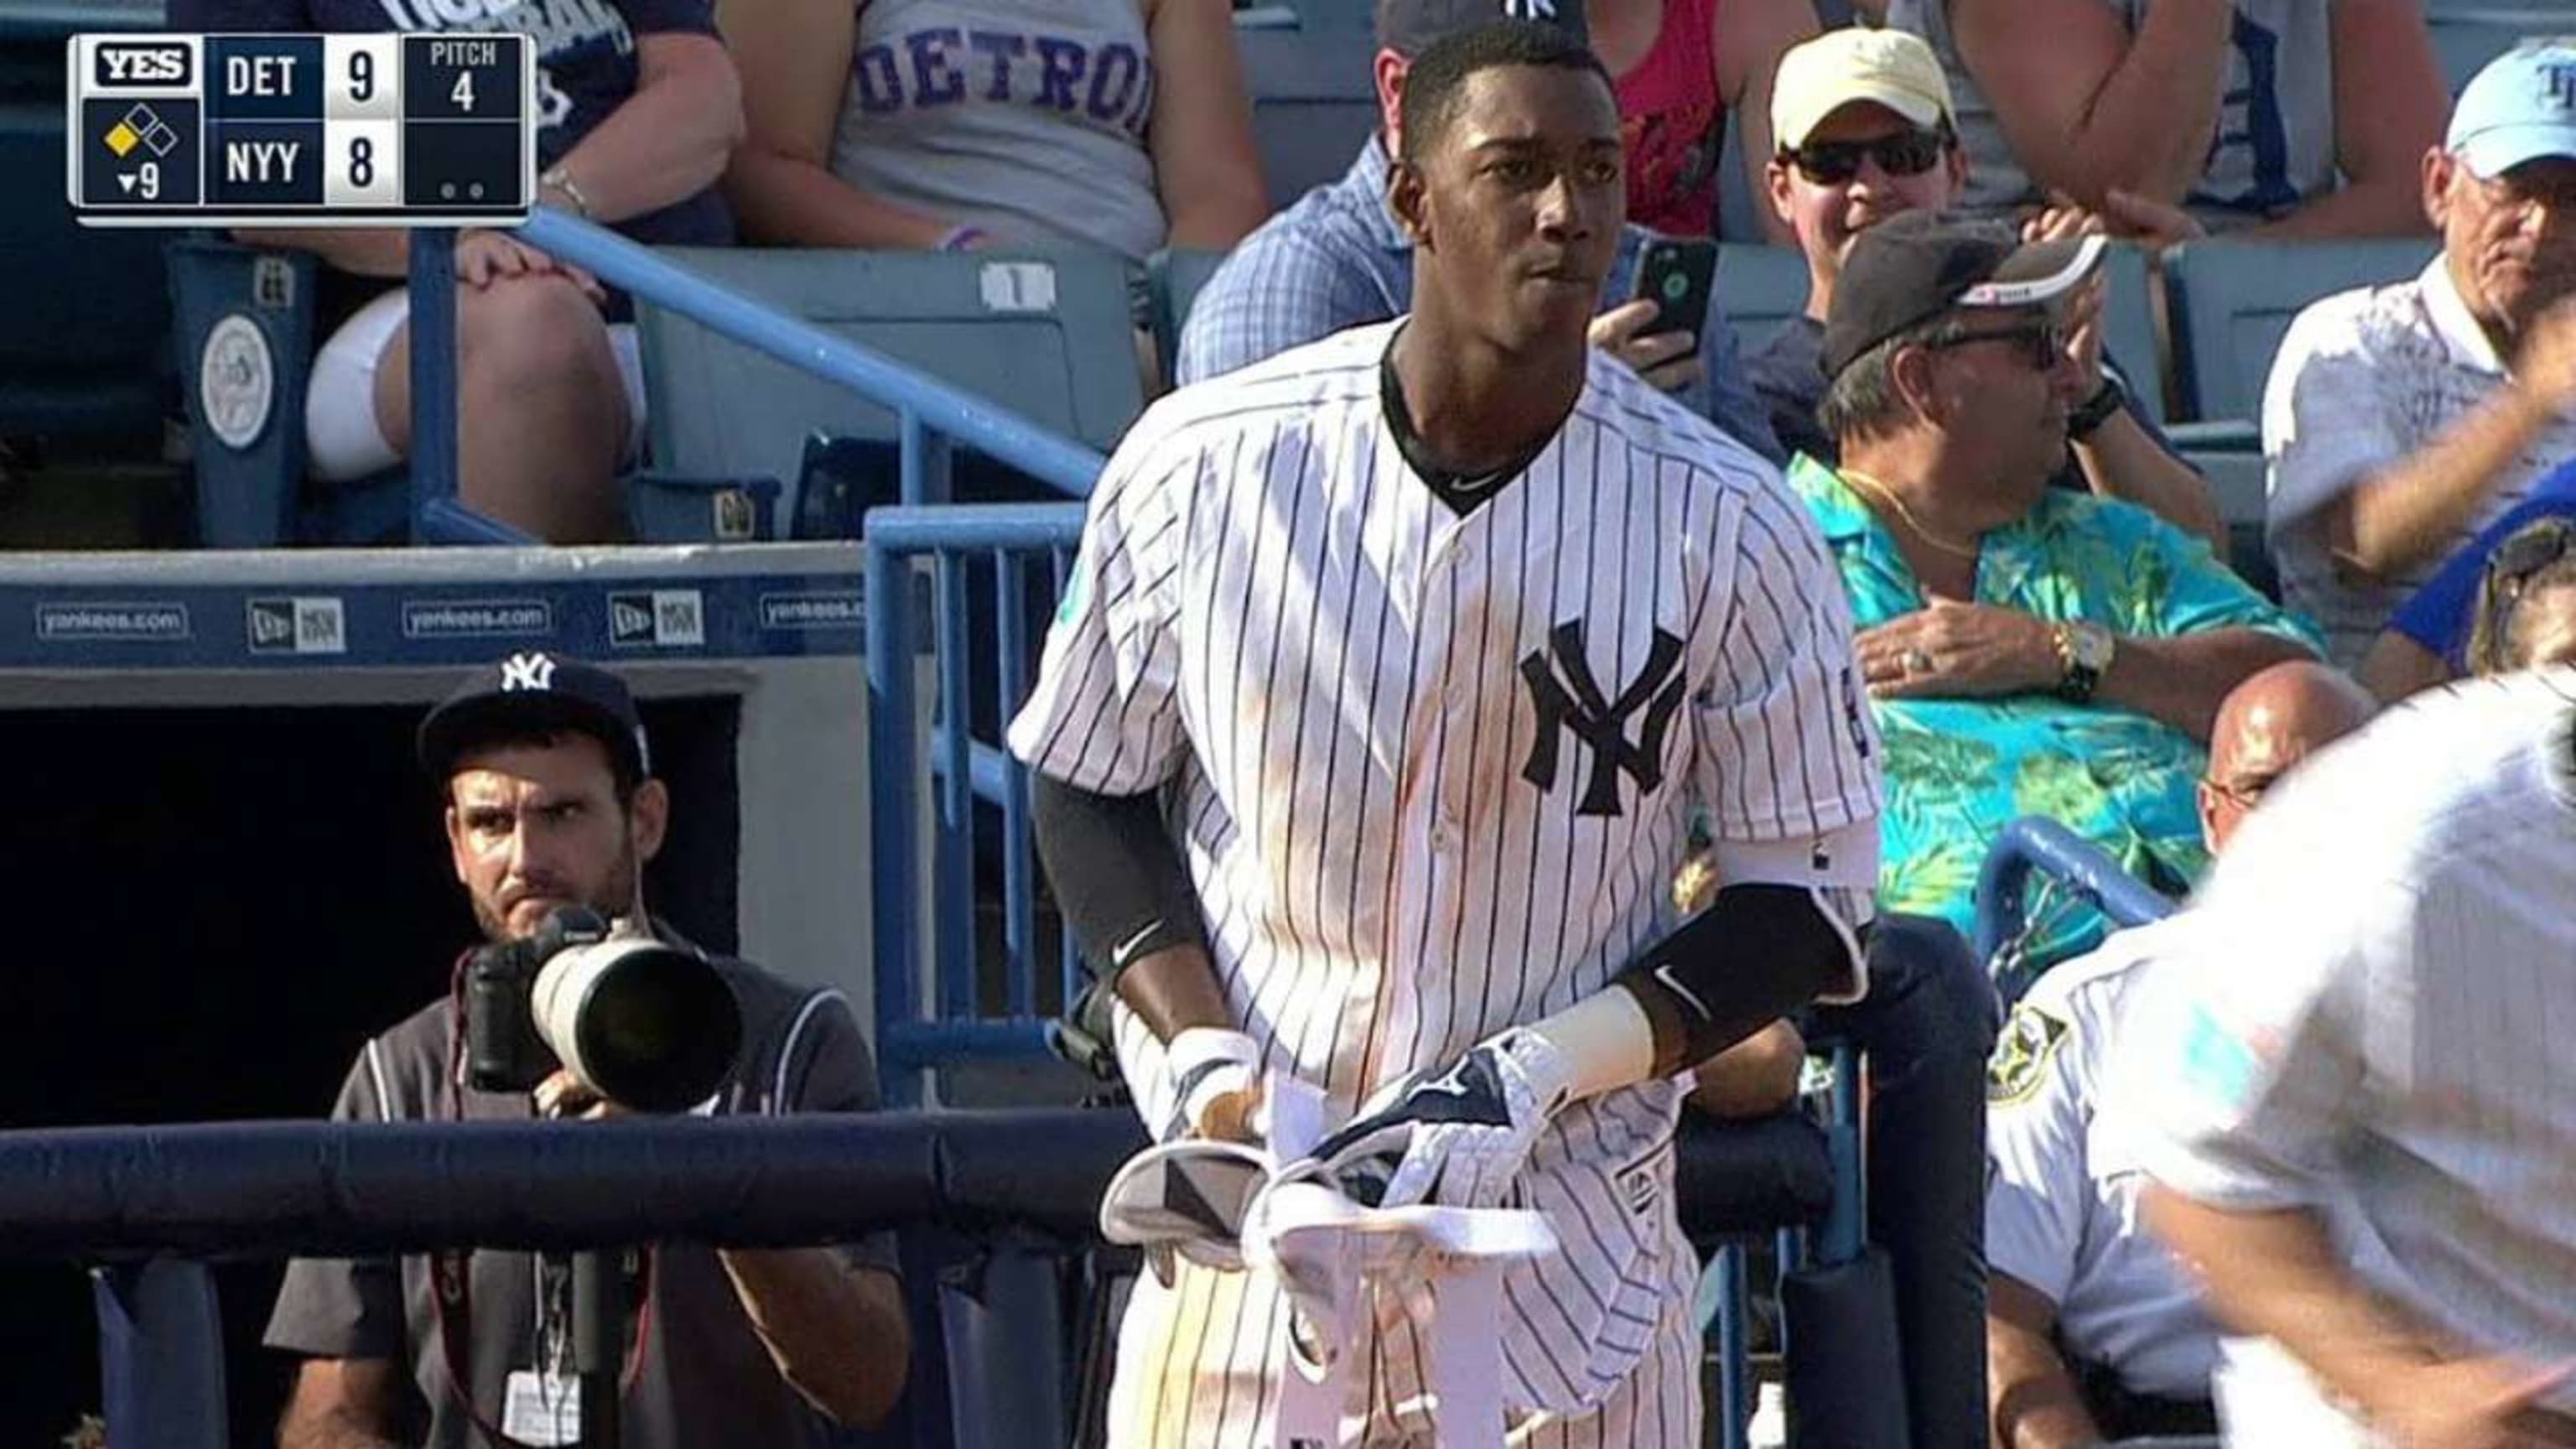 Off and running: Jorge Mateo steals the show in Yankees camp